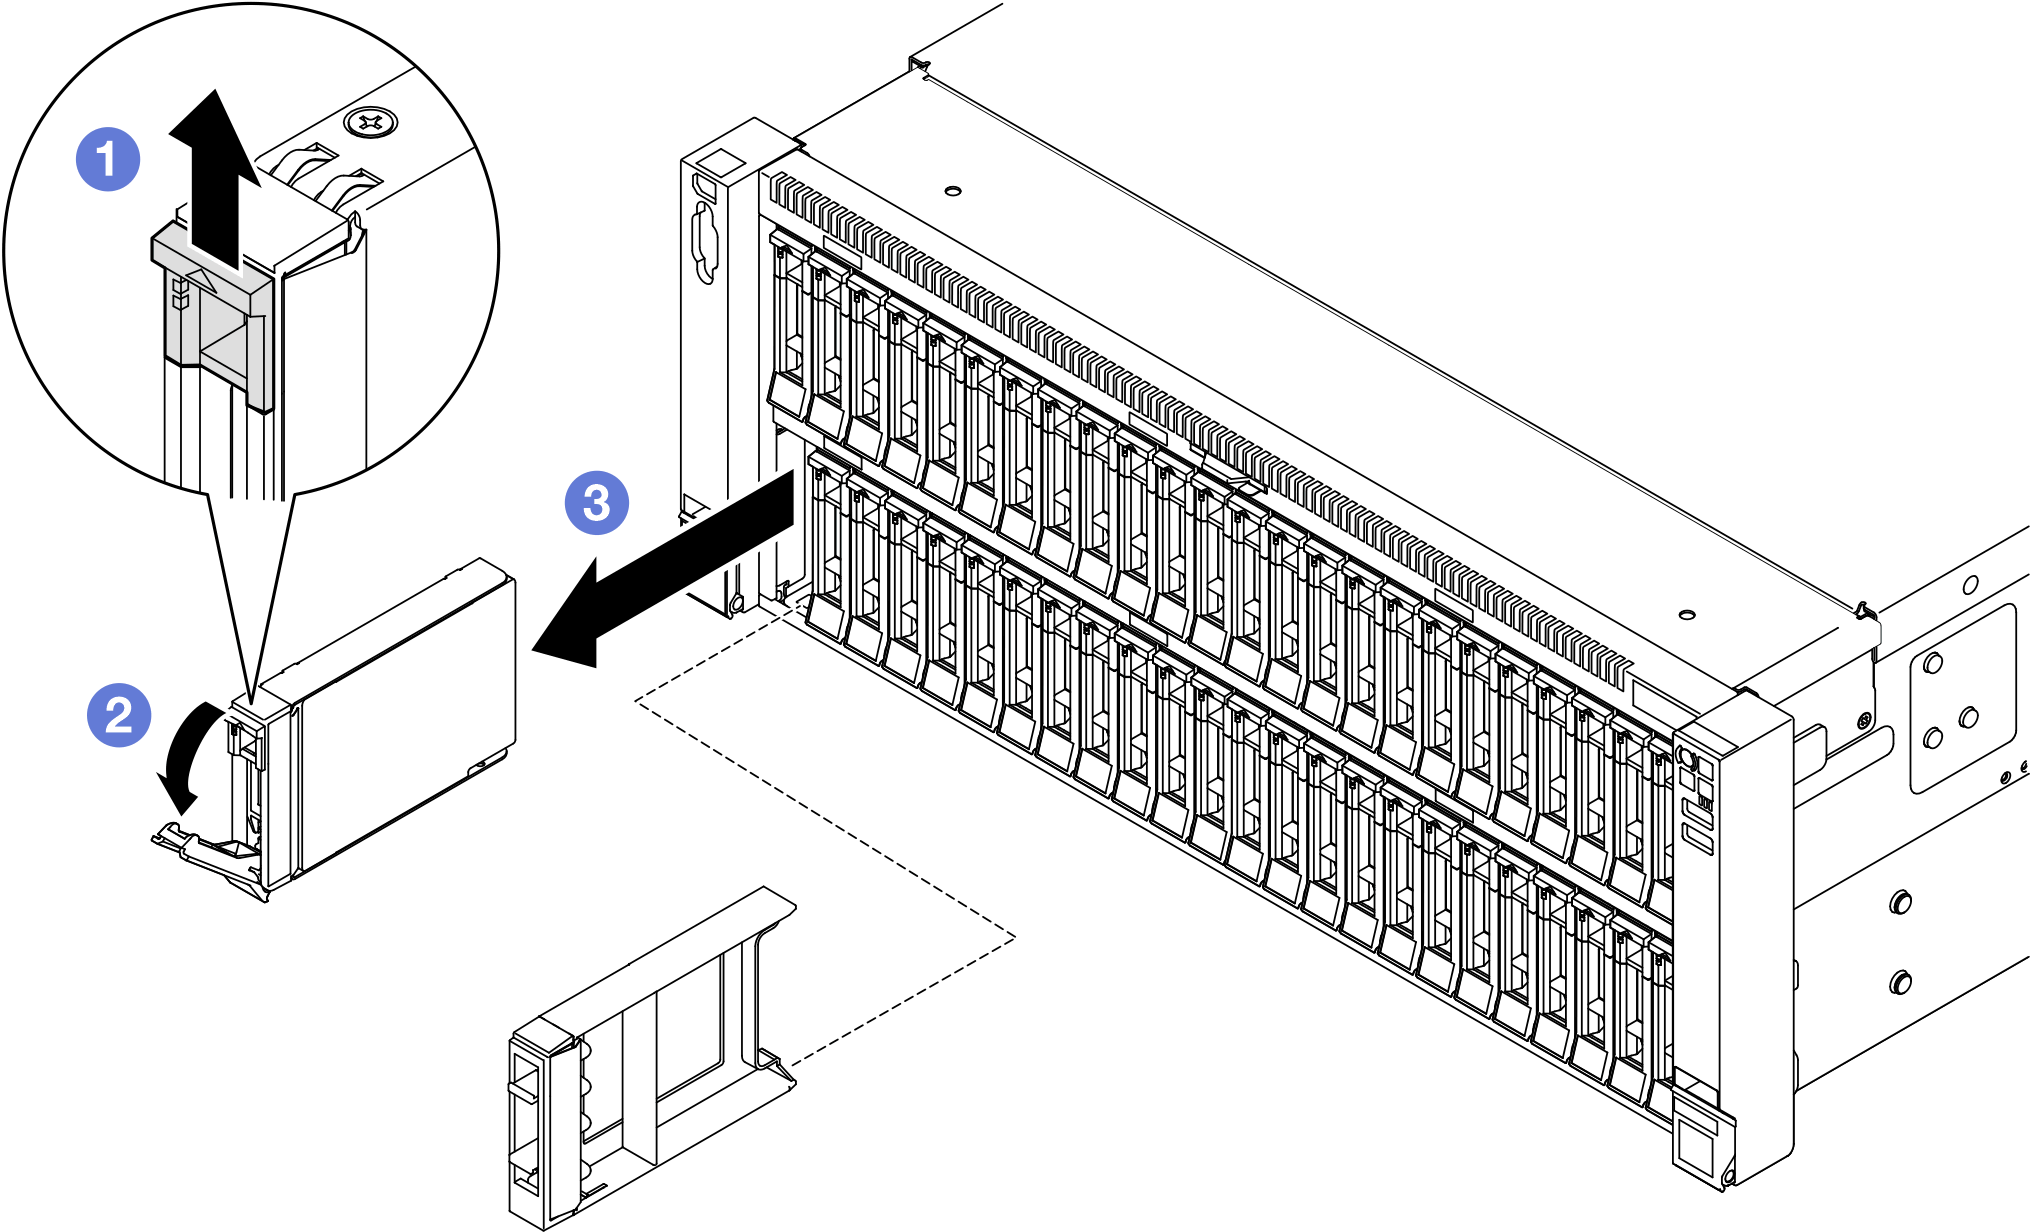 Removing a 2.5-inch drive